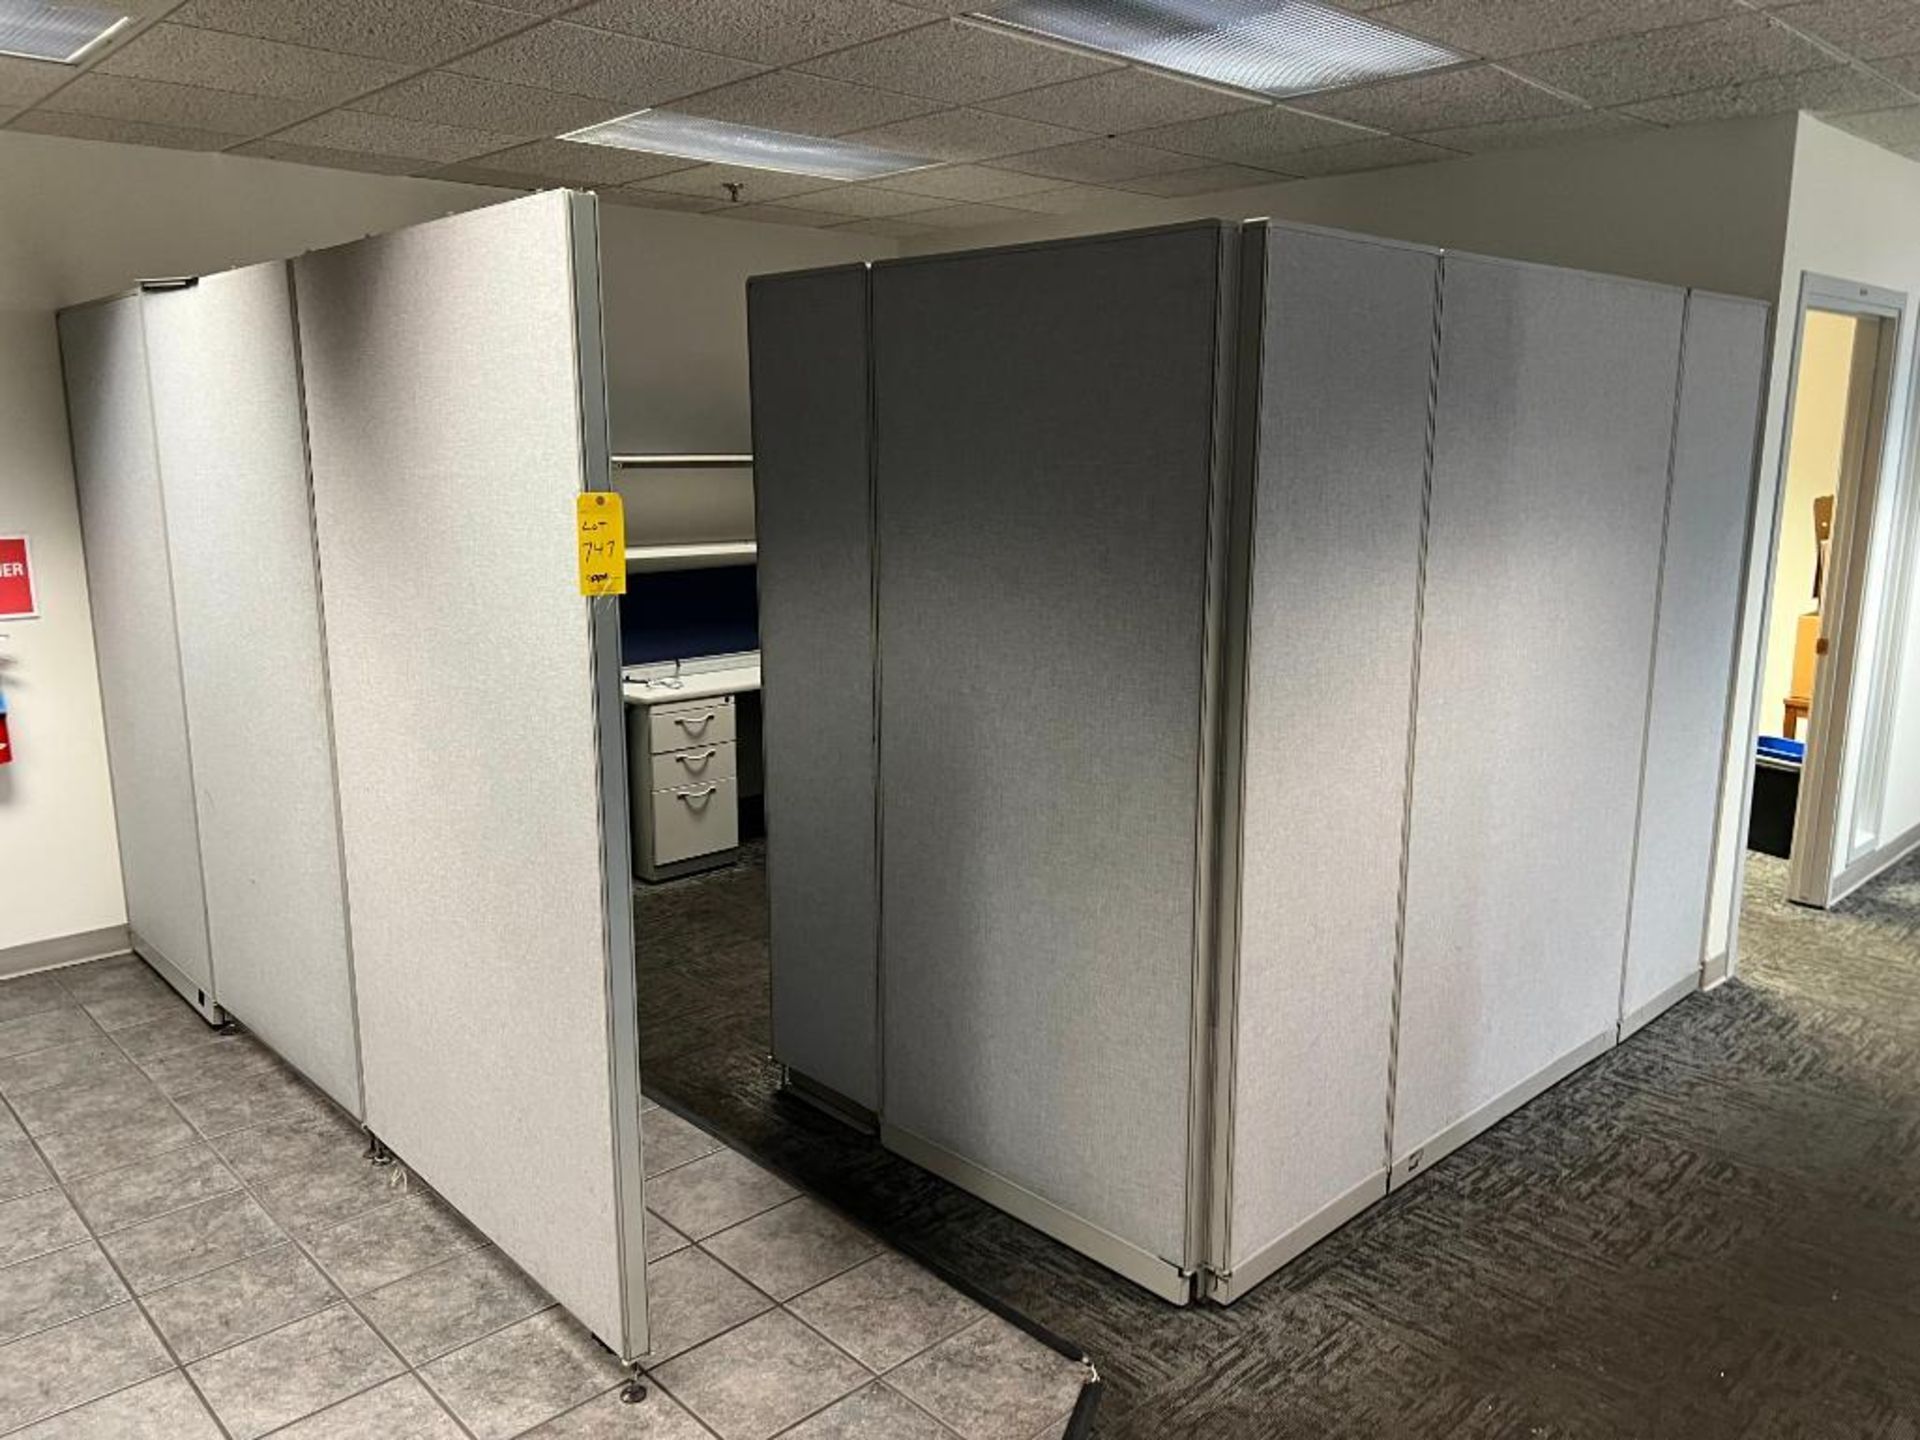 LOT: Contents of (9) Cubicles: Desks, Chairs, Office Supplies, Zebra GK420T Thermal Printer, Lexmark